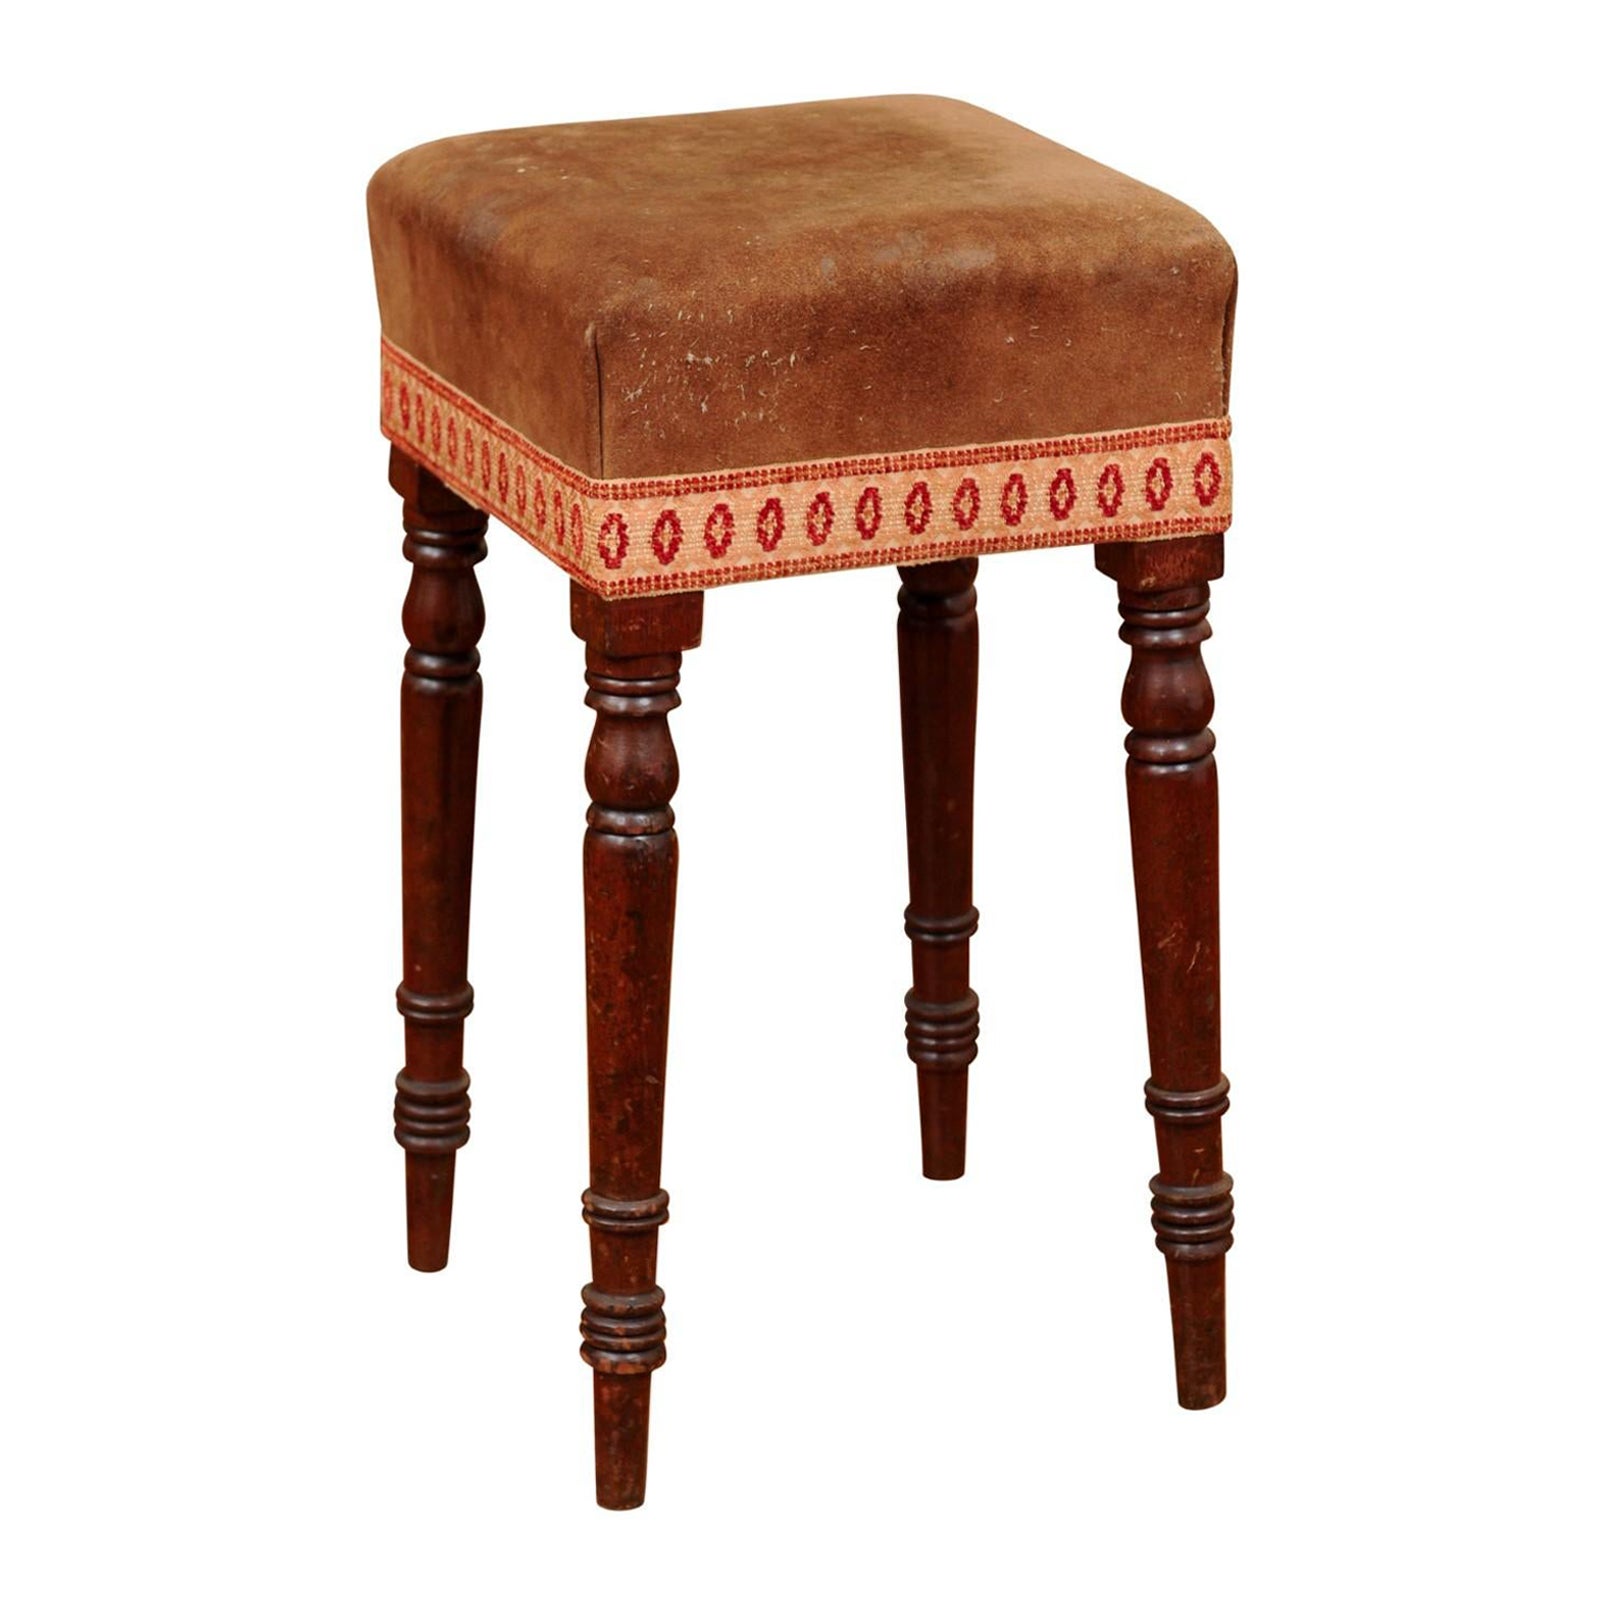 Early 19th Century English Mahogany Stool with Turned Legs & Suede Upholstery